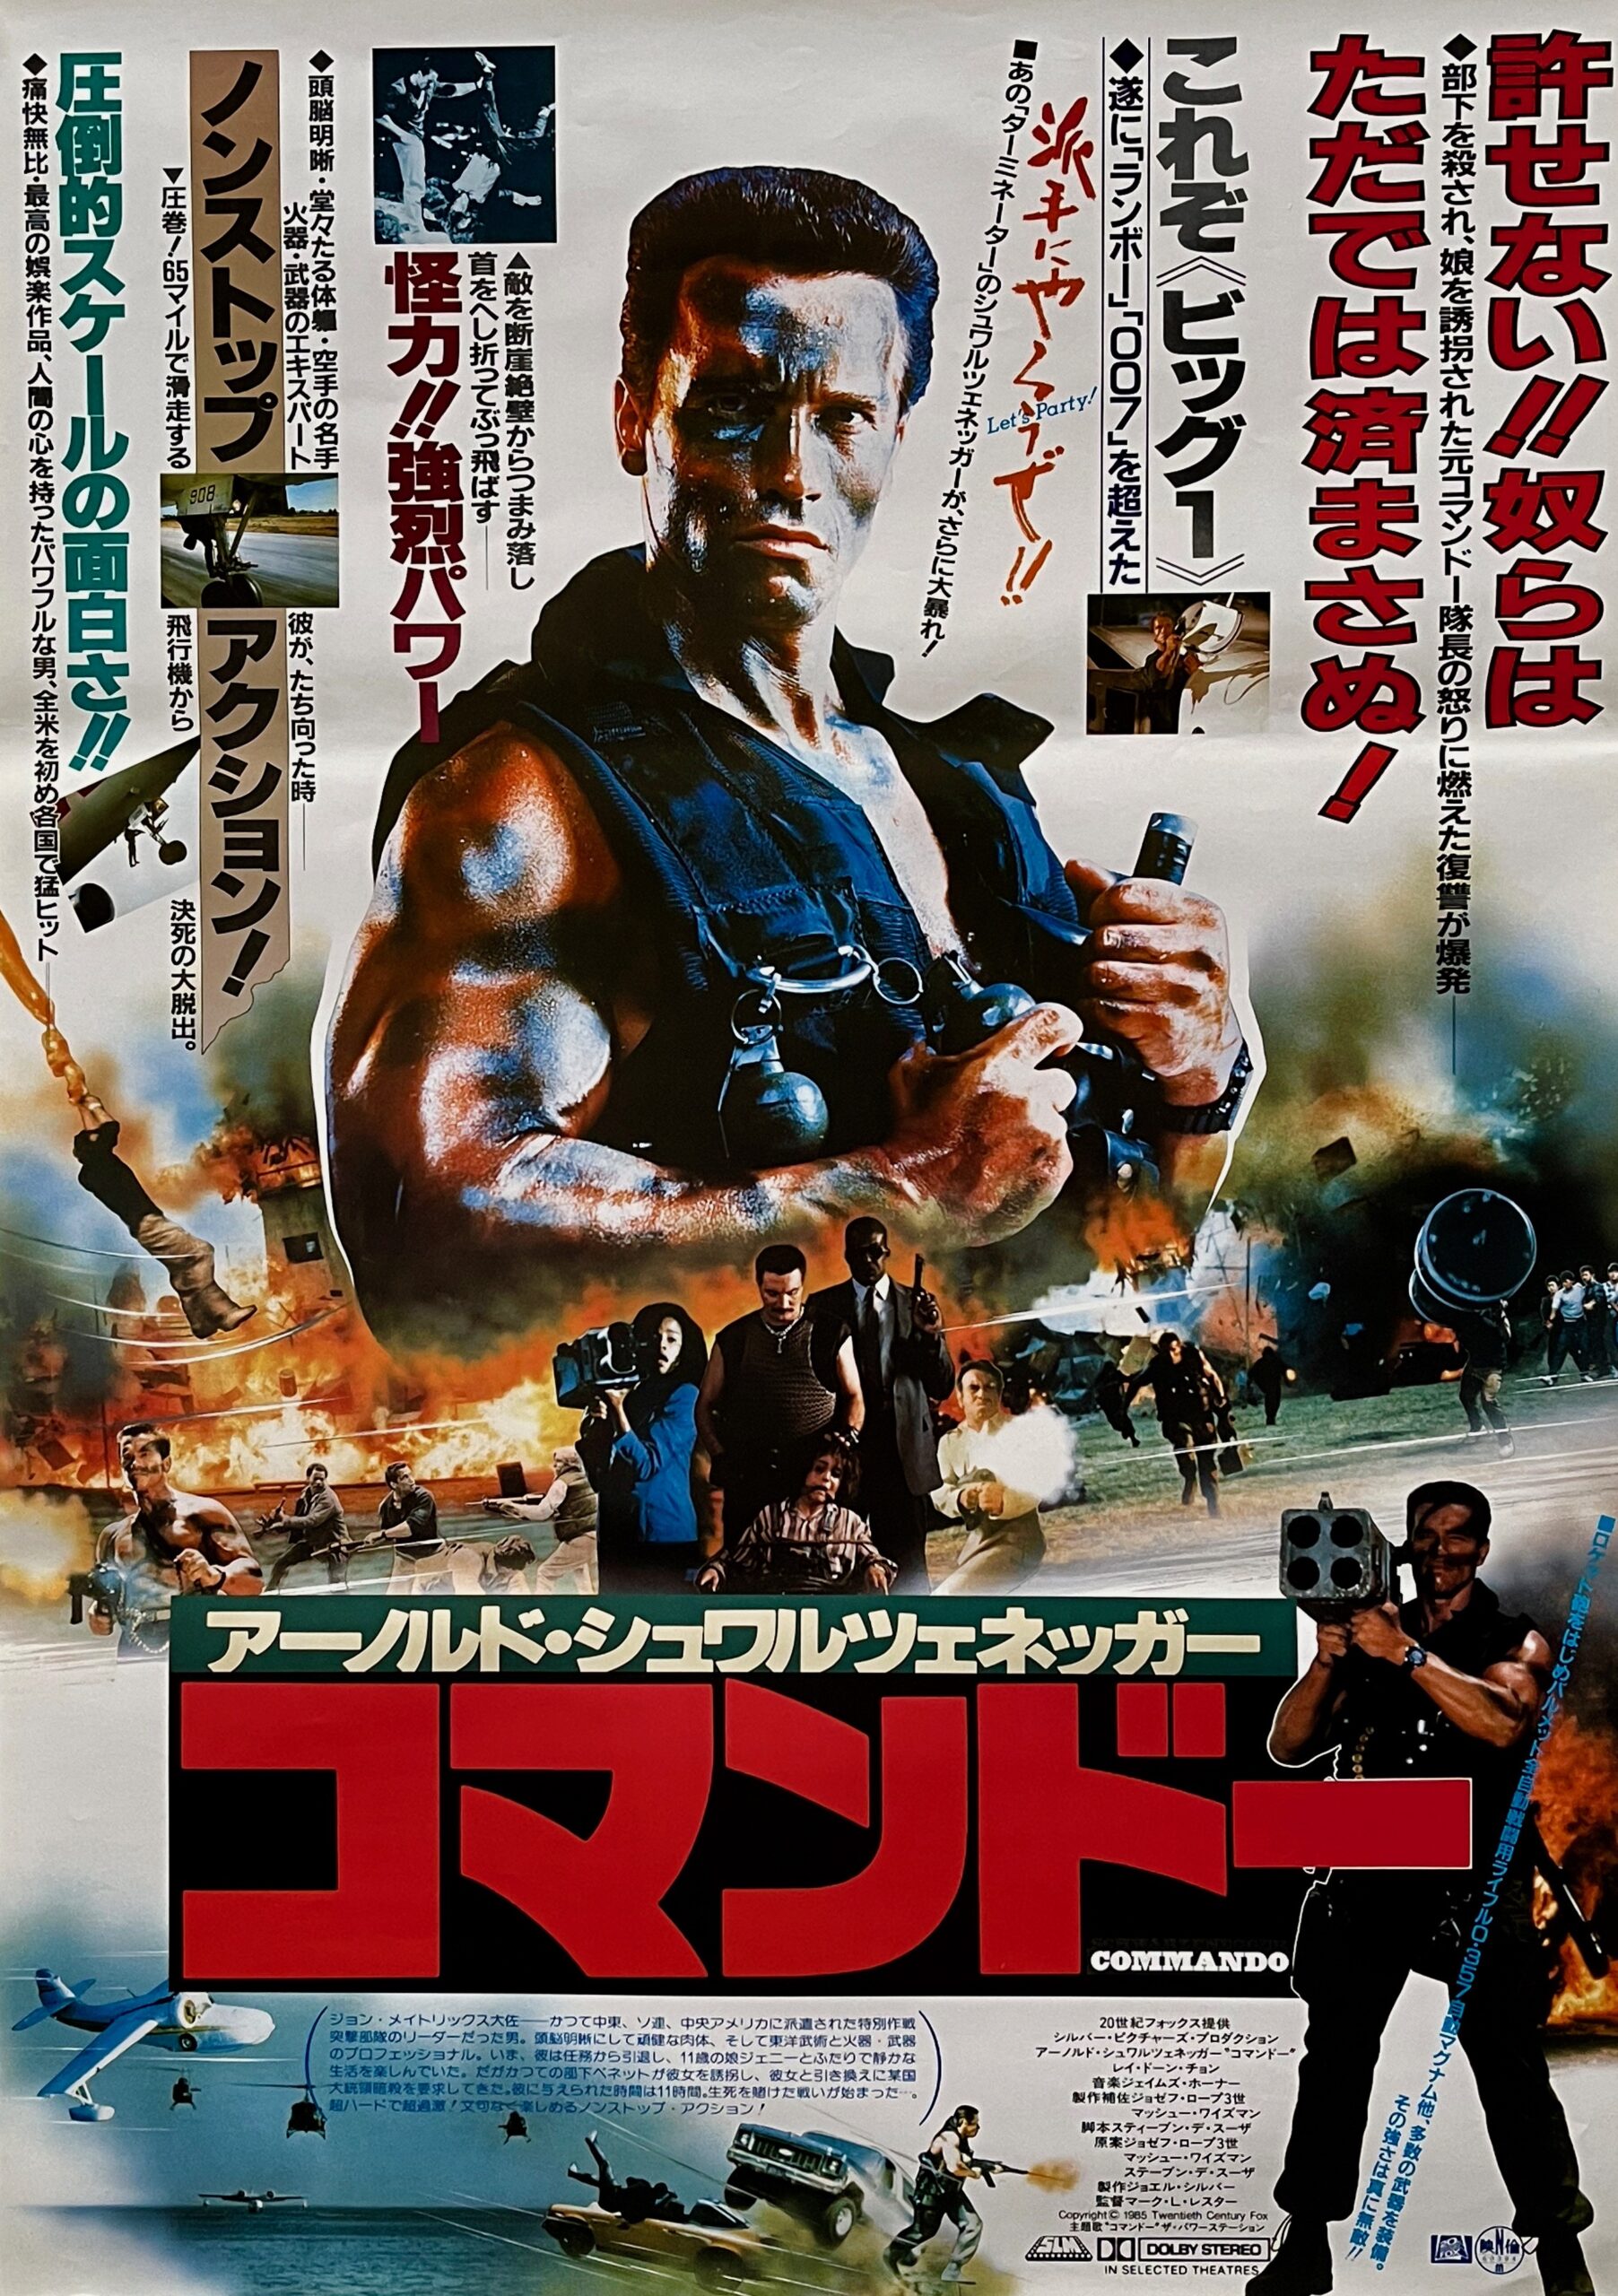 Commando Arnold Classic Movie Large Poster Art Print Gift A0 A1 A2 A3 A4